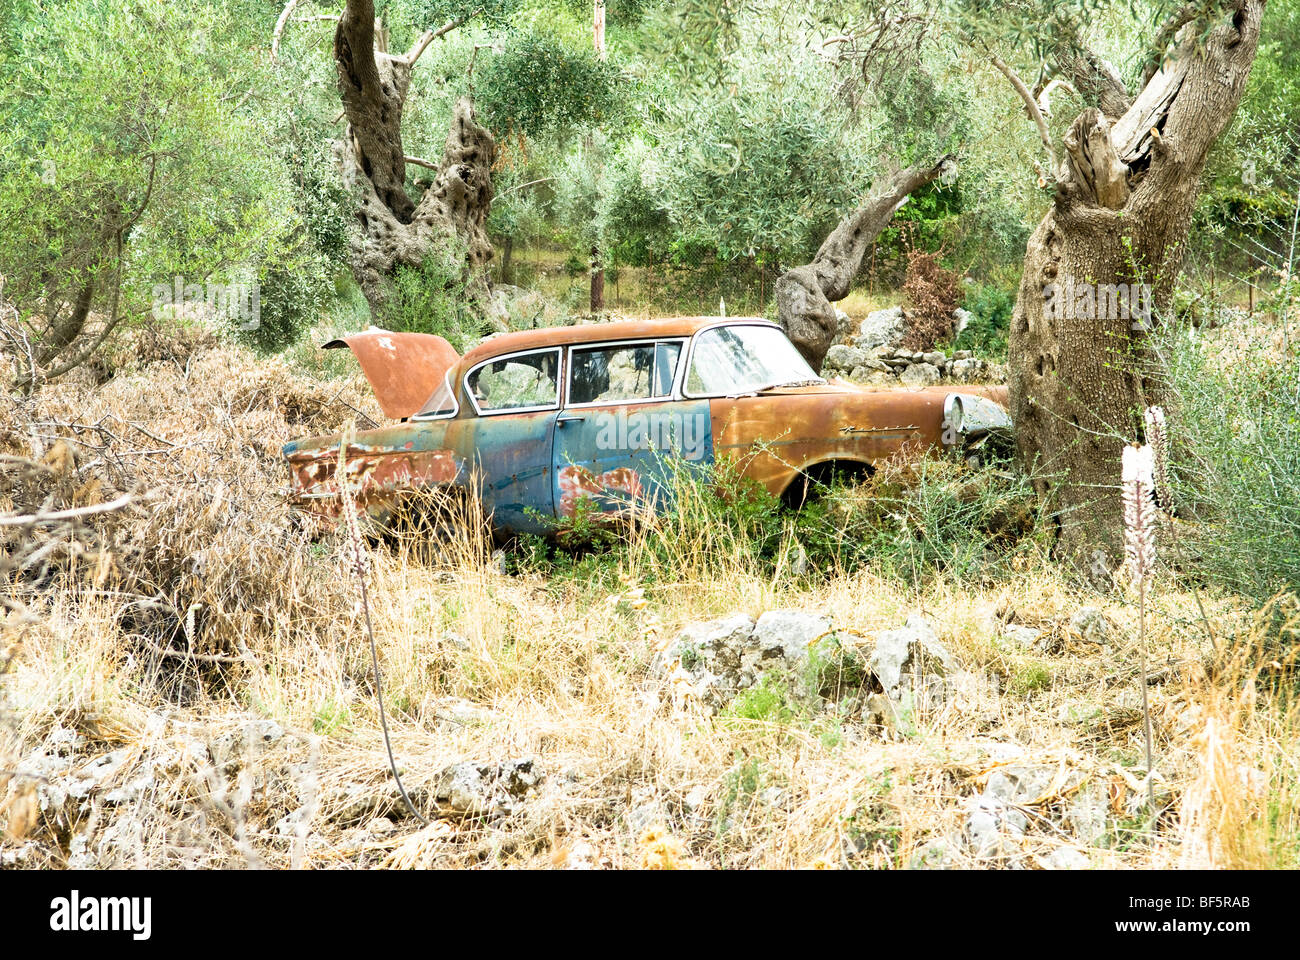 A rusty old car left abandoned in the countryside. Stock Photo